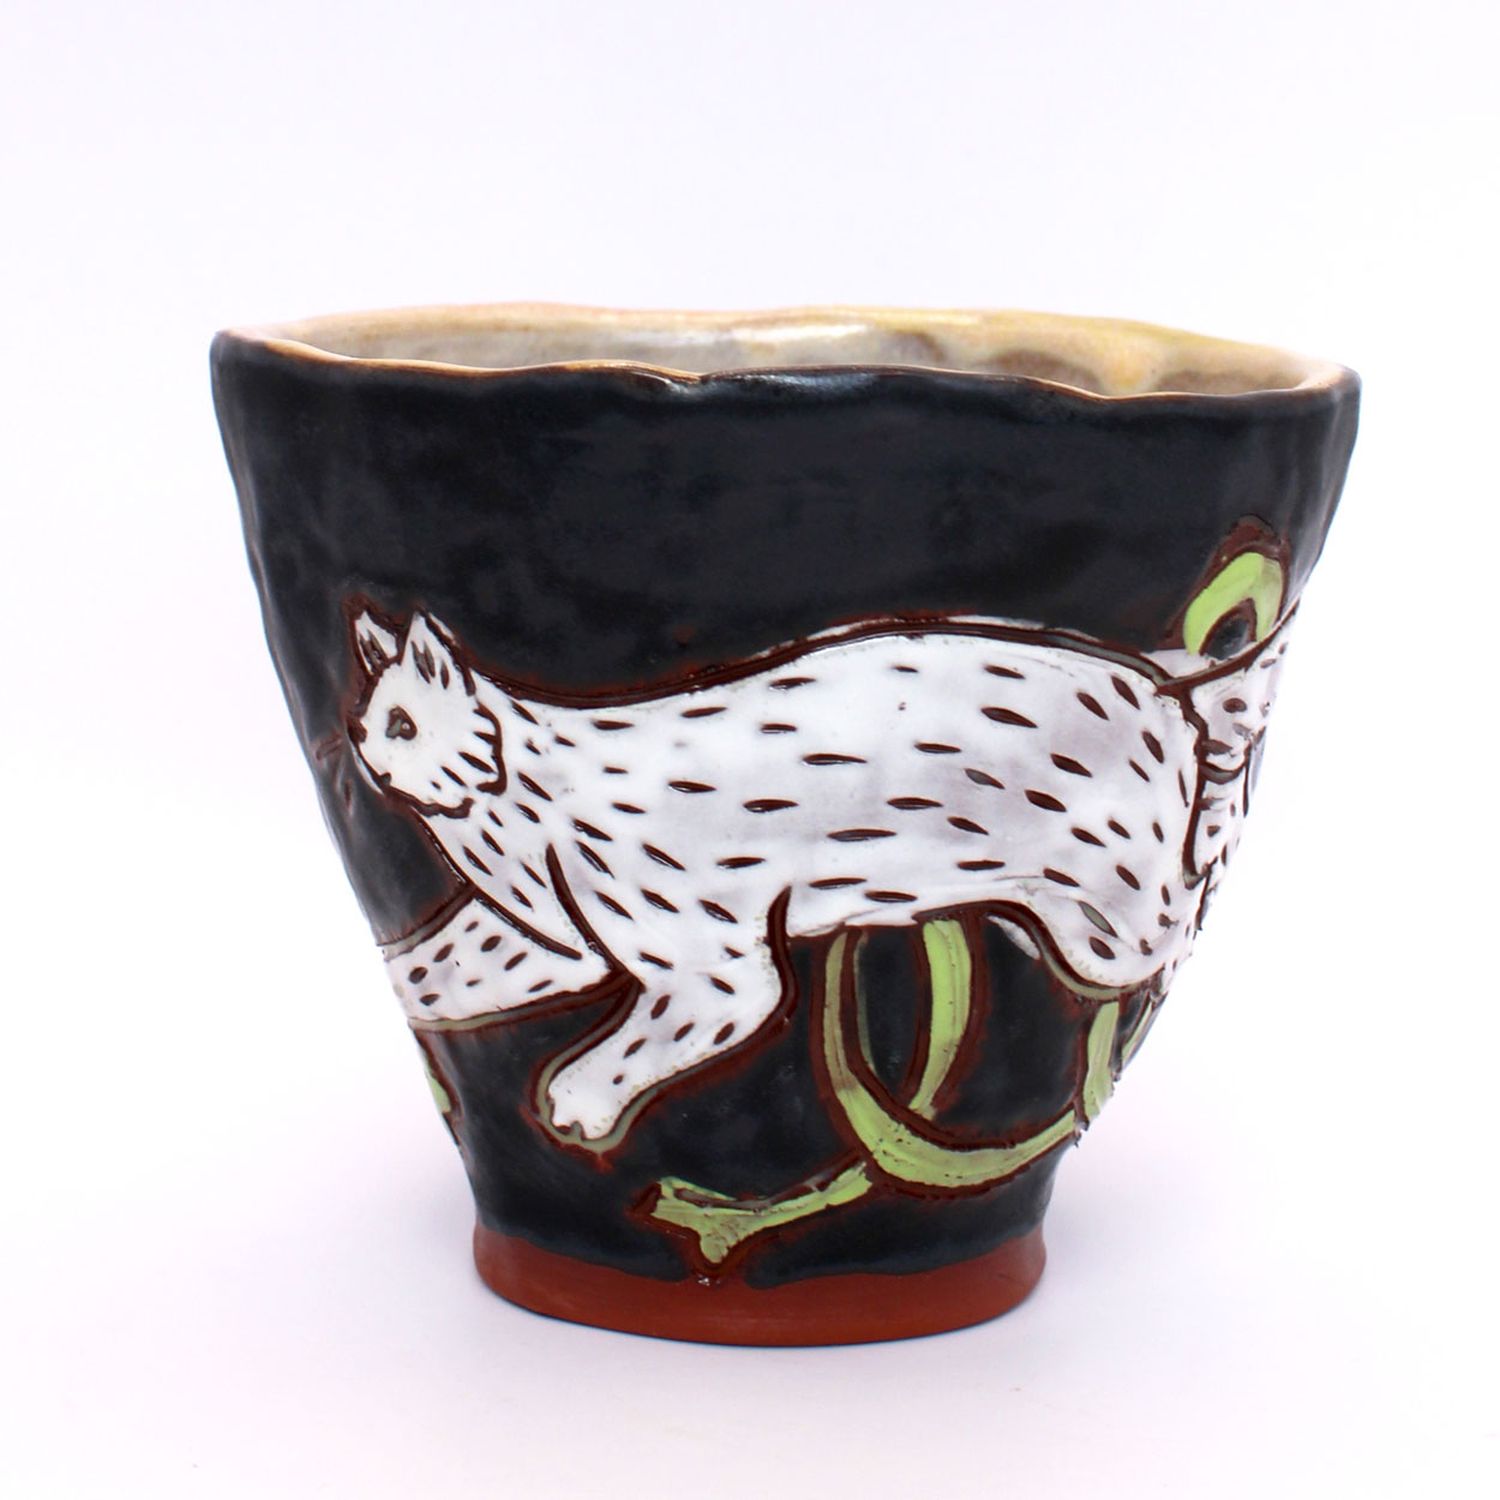 Zoe Pinnell: White Cat Cup Product Image 1 of 2